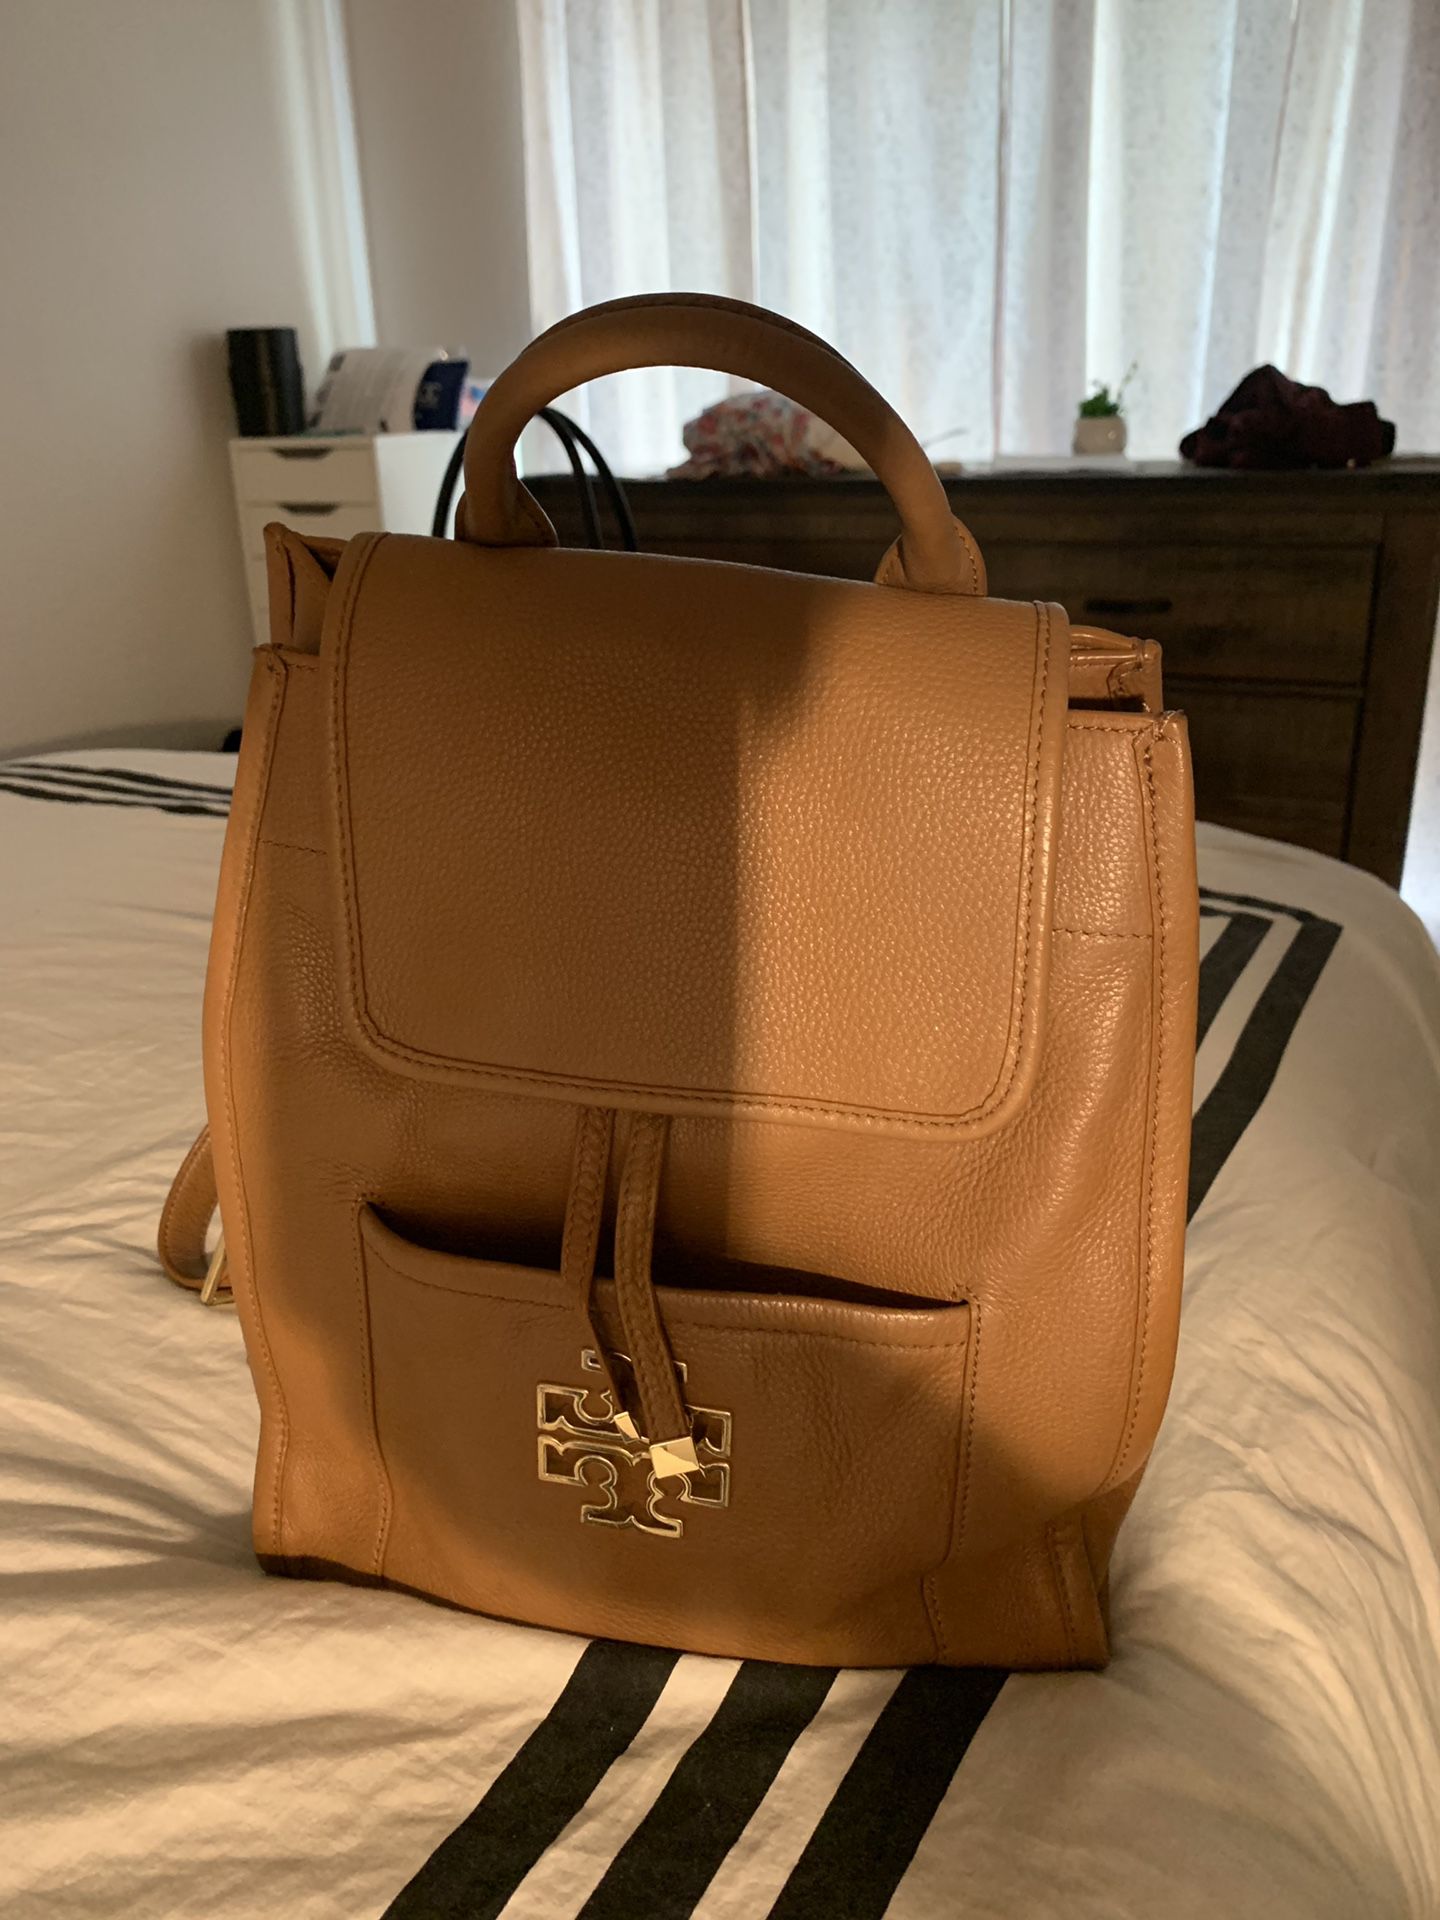 Authentic Tory Burch Backpack